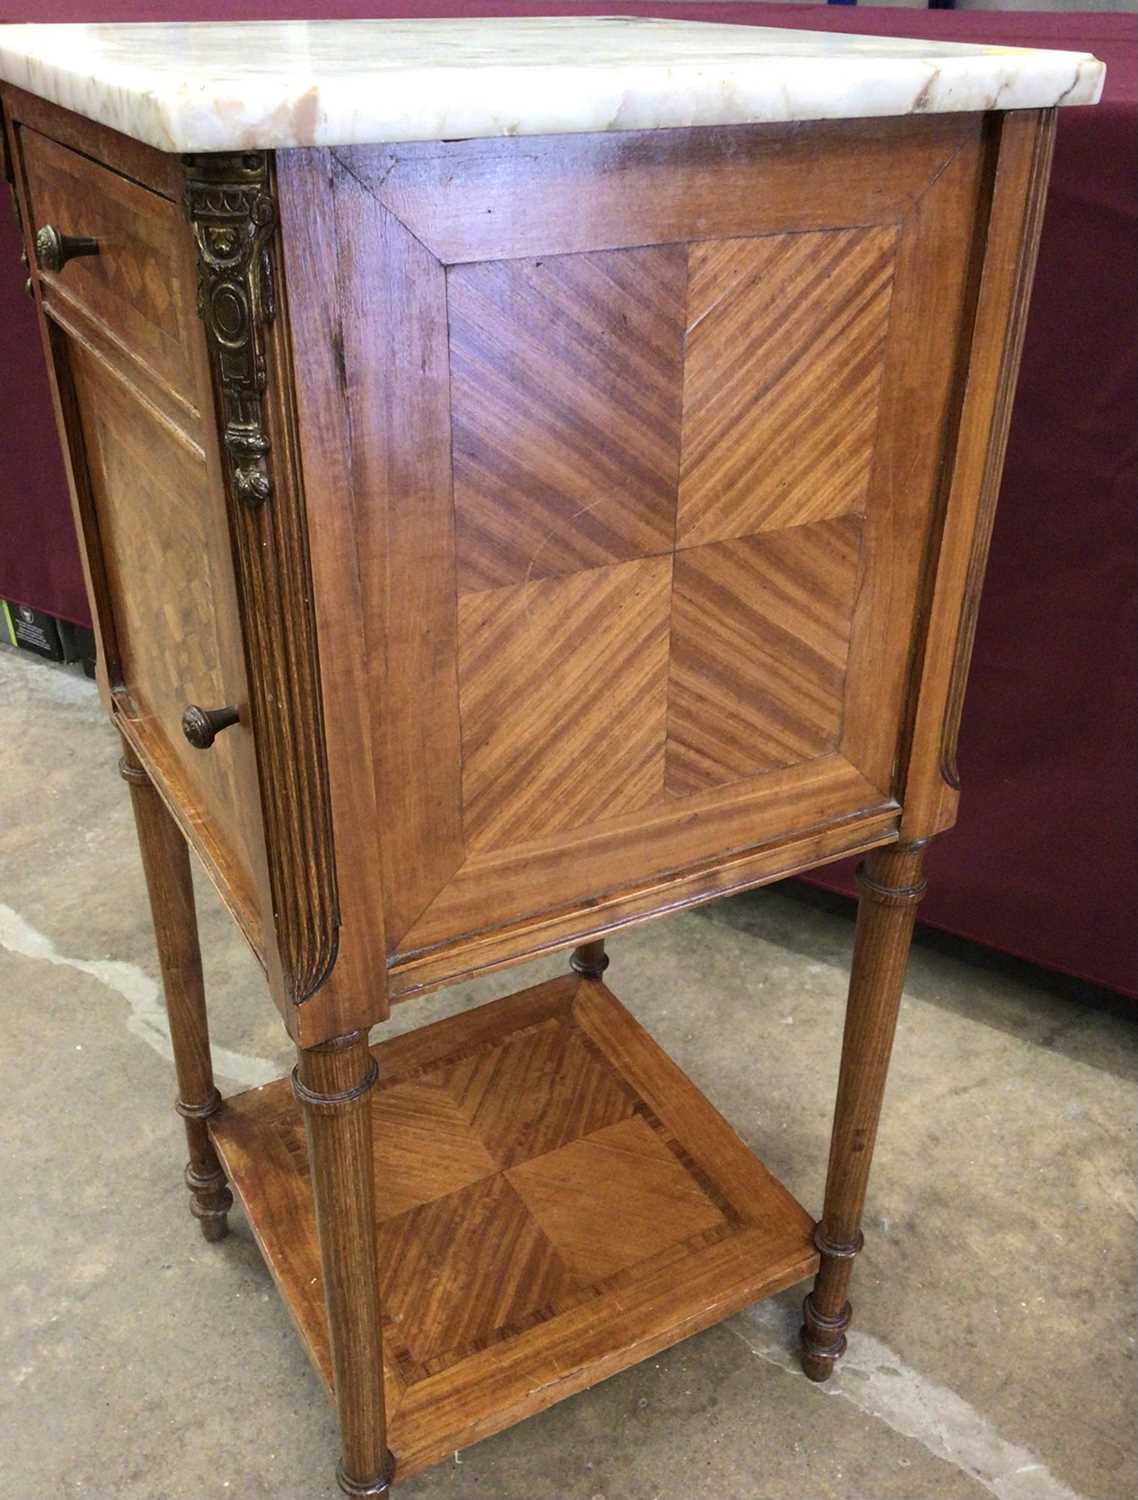 Early 20th century French parquetry bedside cupboard with marble top and unusual ceramic liner fitte - Image 3 of 7